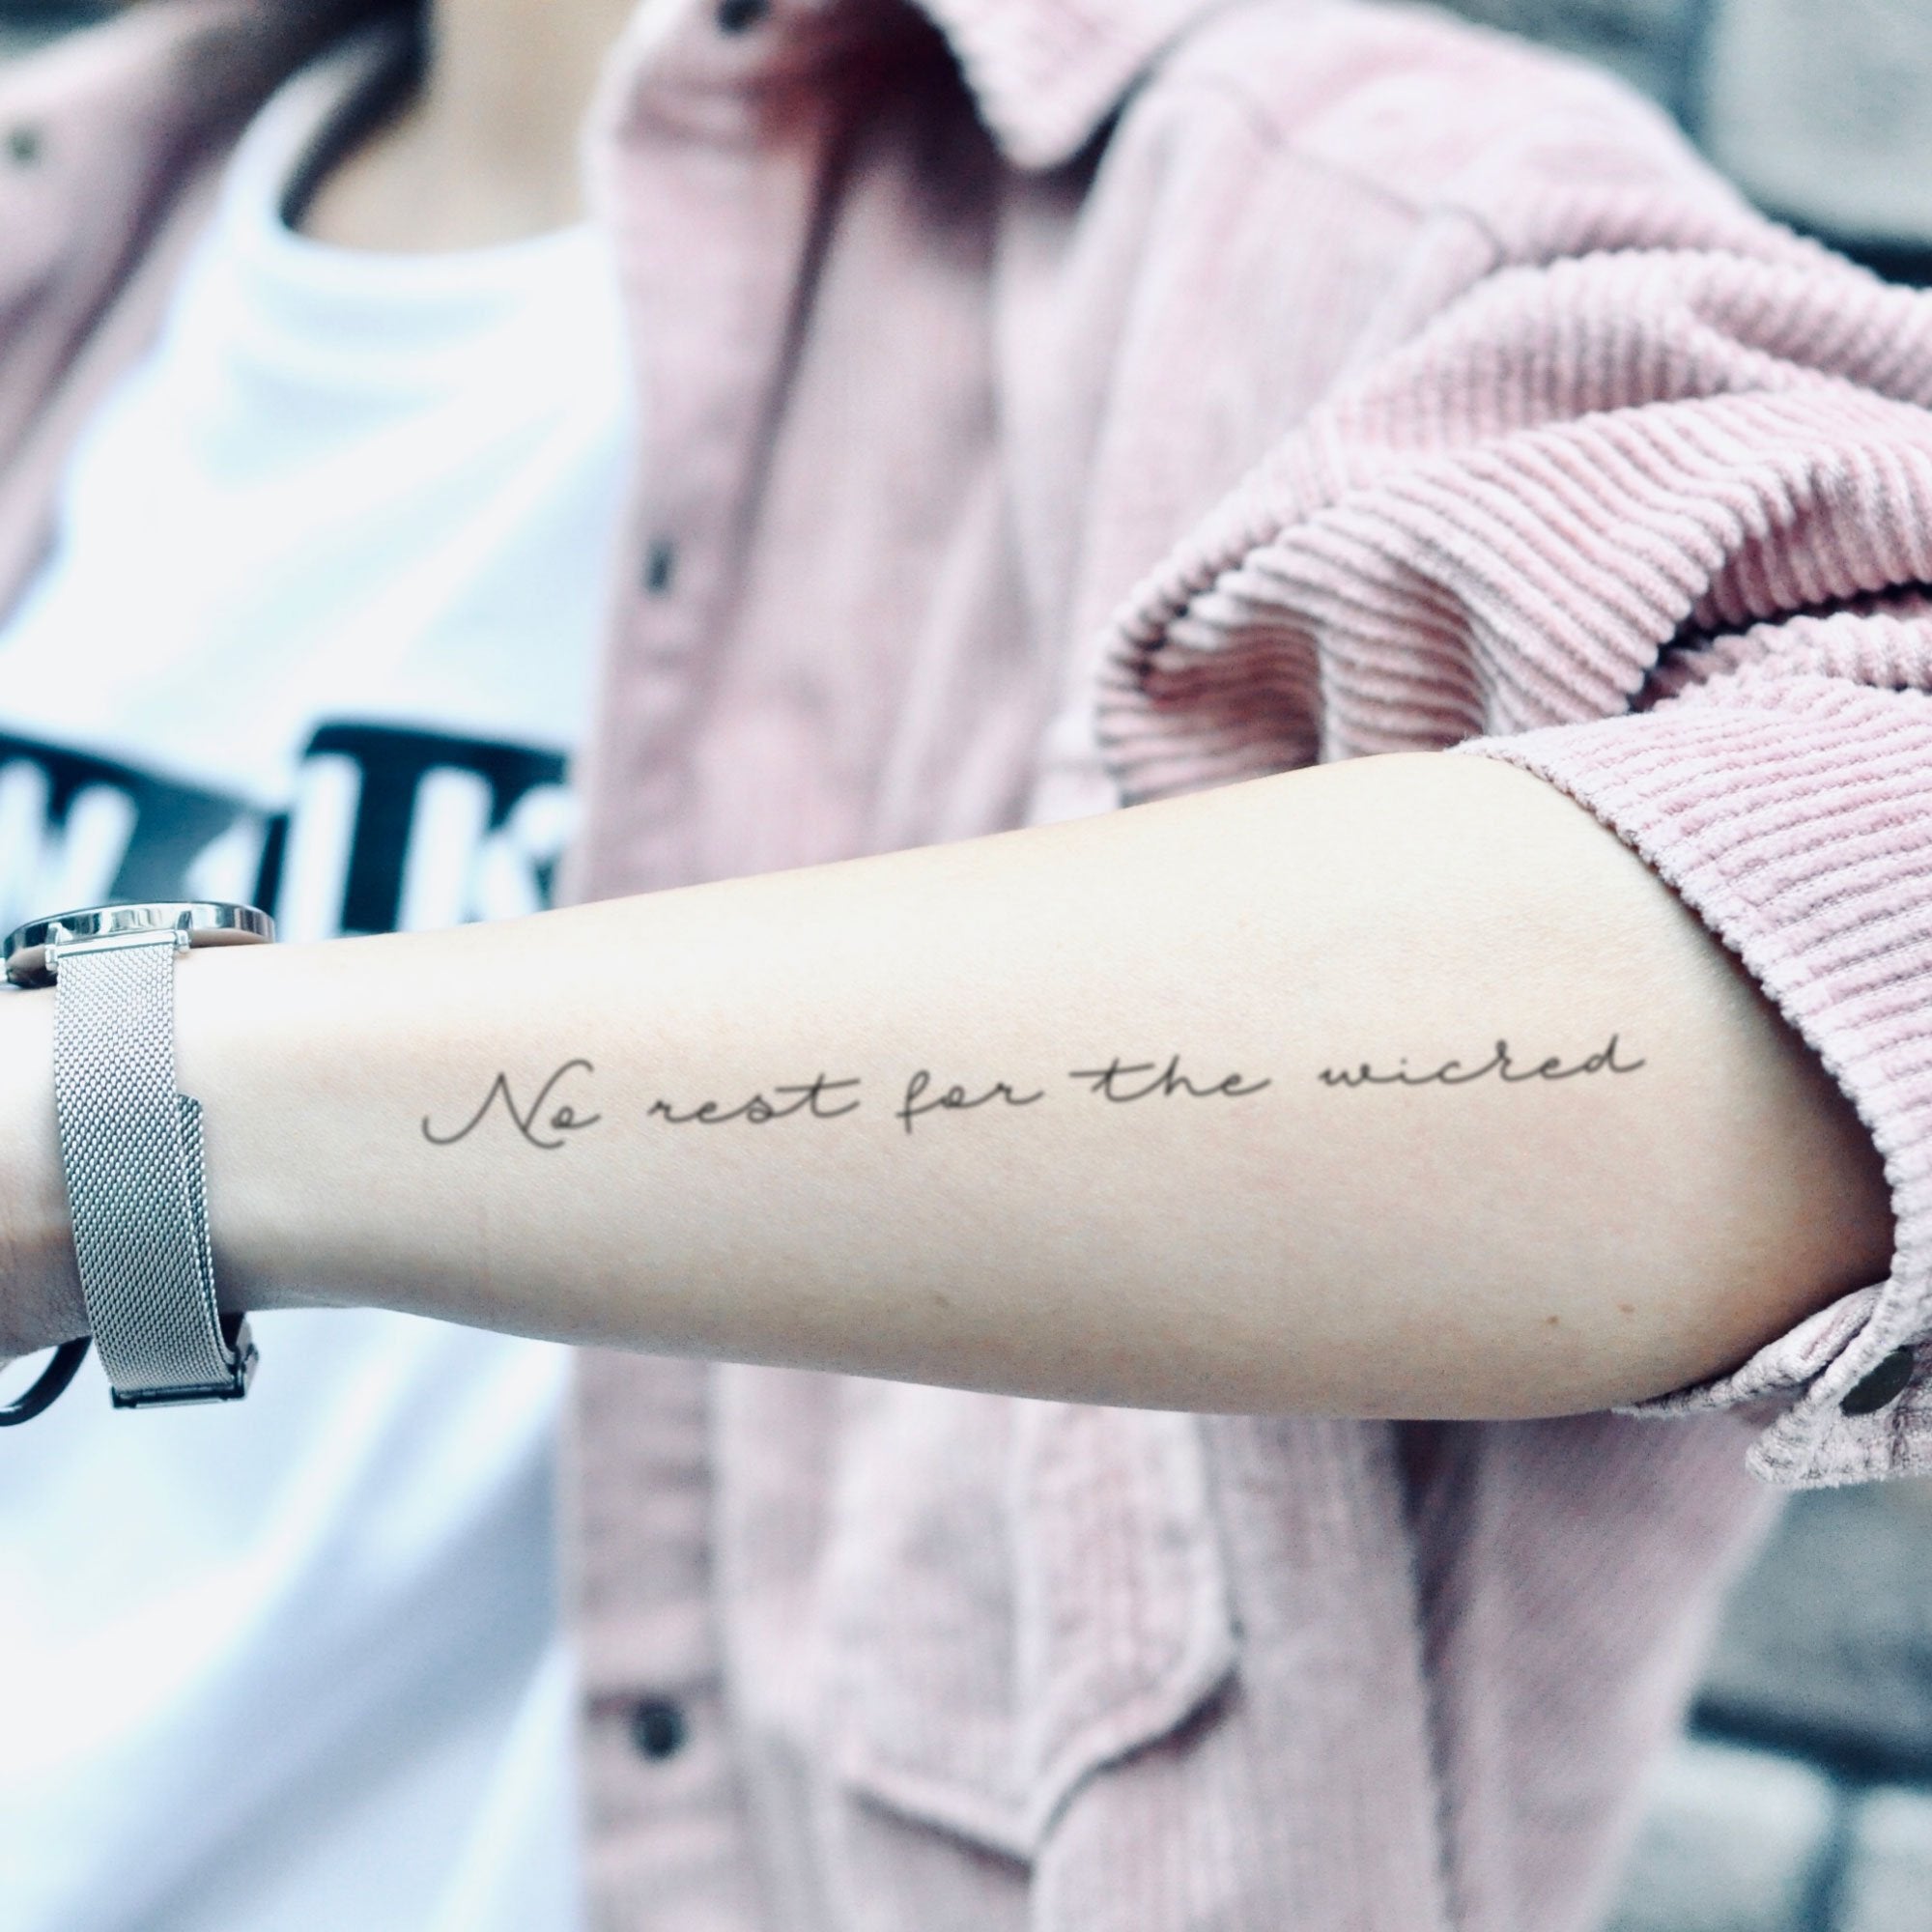 15 band tattoos to get with your BFF